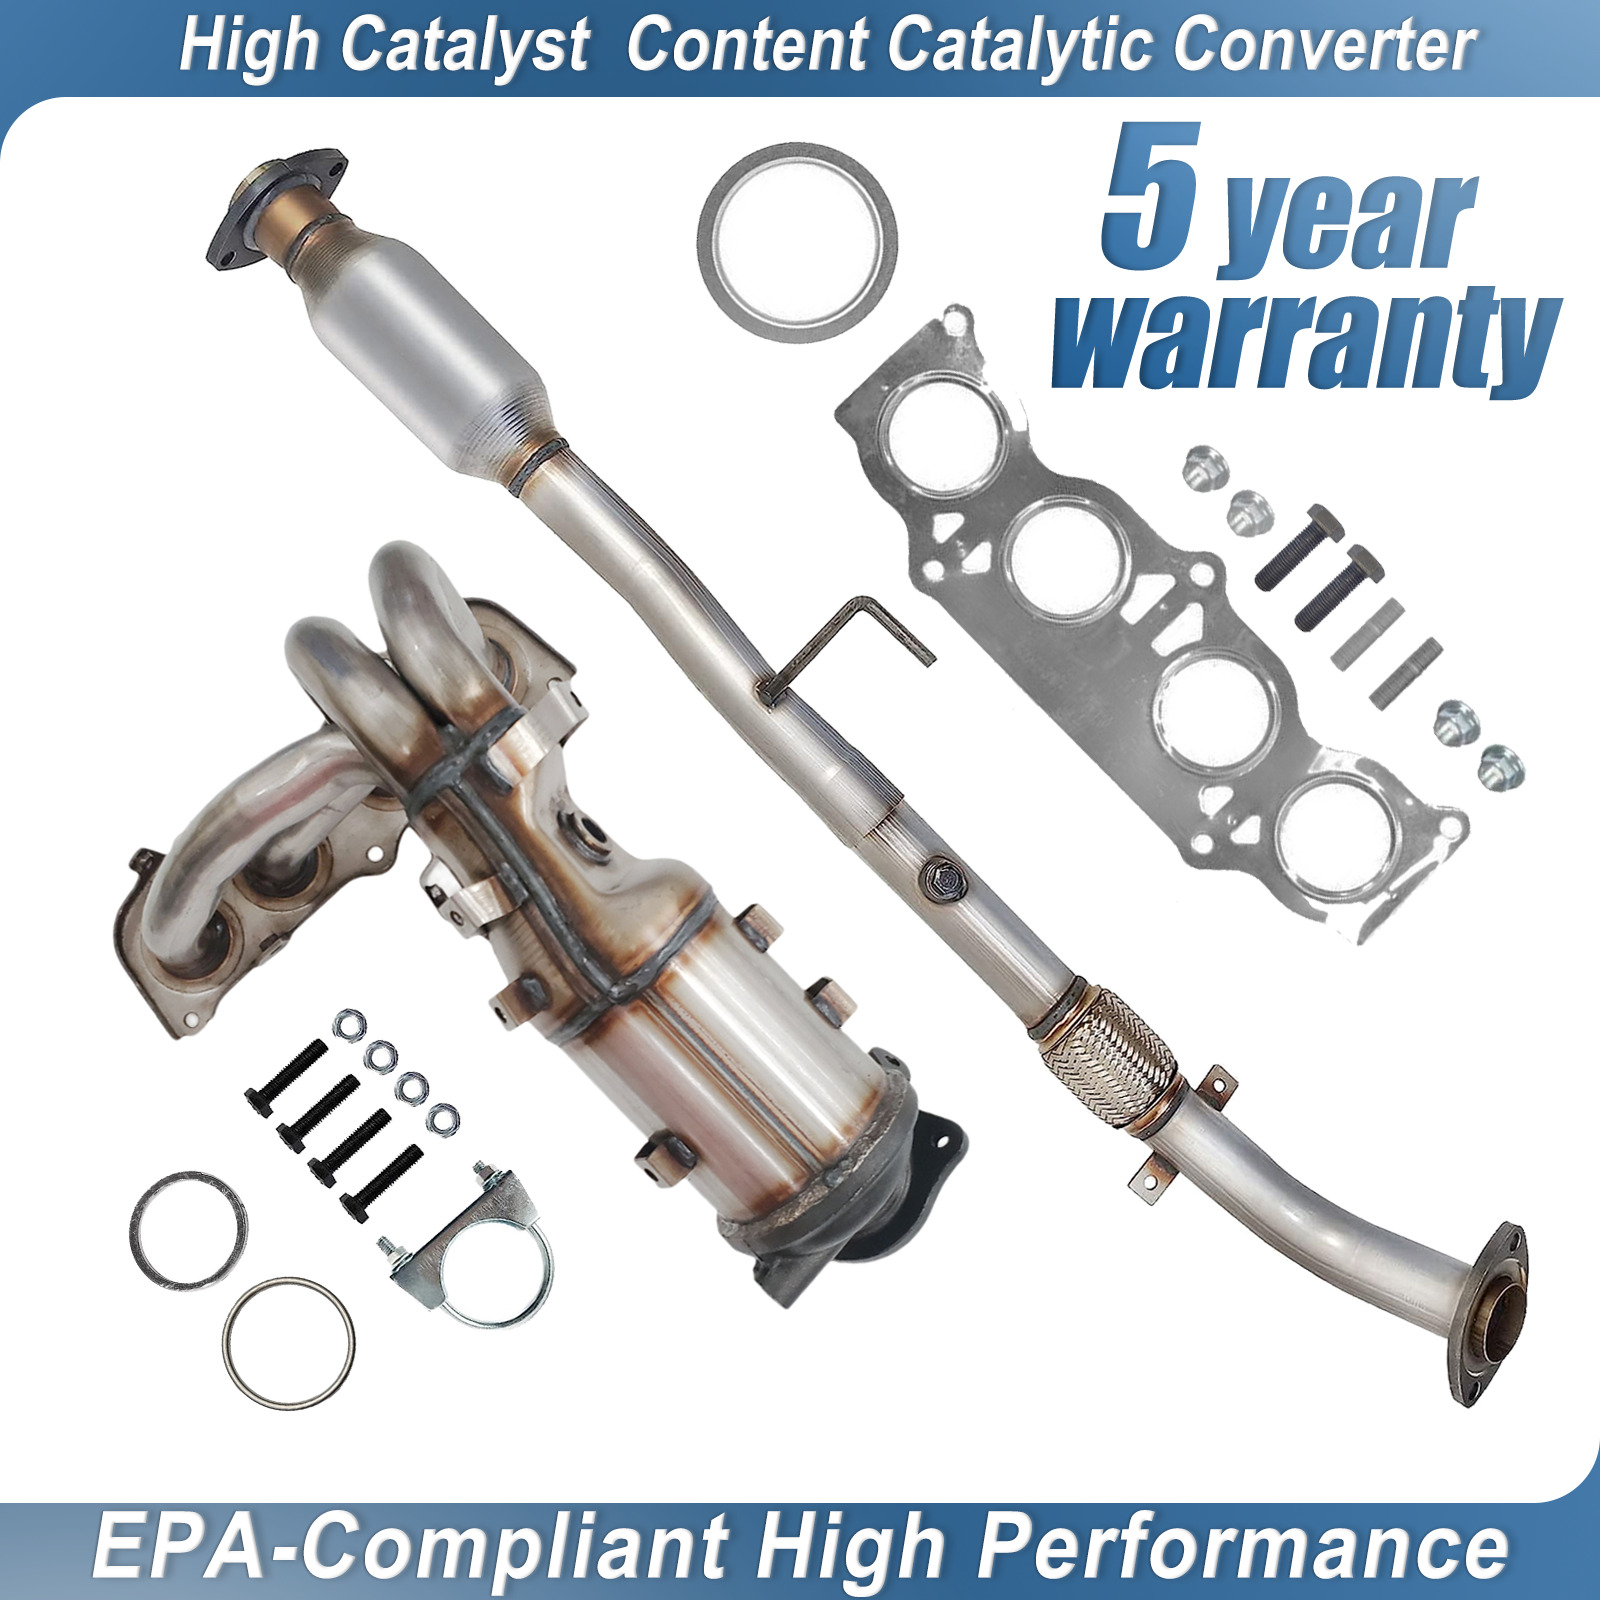 2x Front rear Catalytic Converter for 2007 - 2009 Toyota camry 2.4L EPA quality